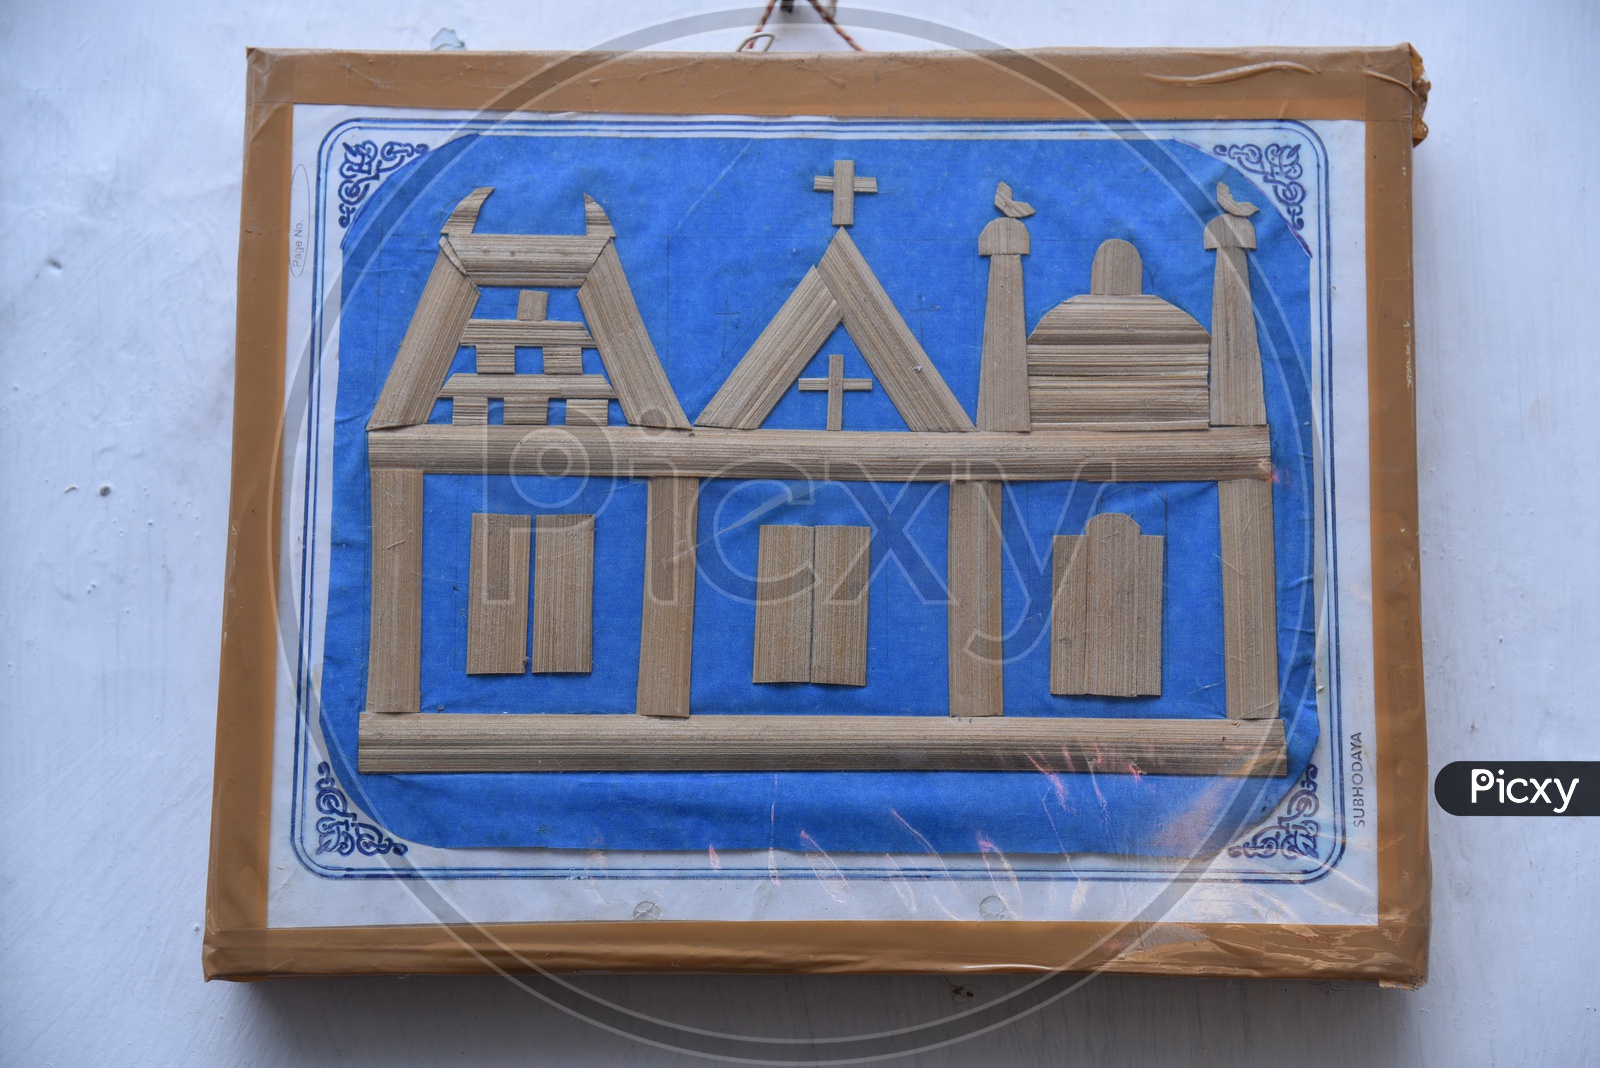 Temple, Church and Mosque illustration done by Government primary school students using wood pieces